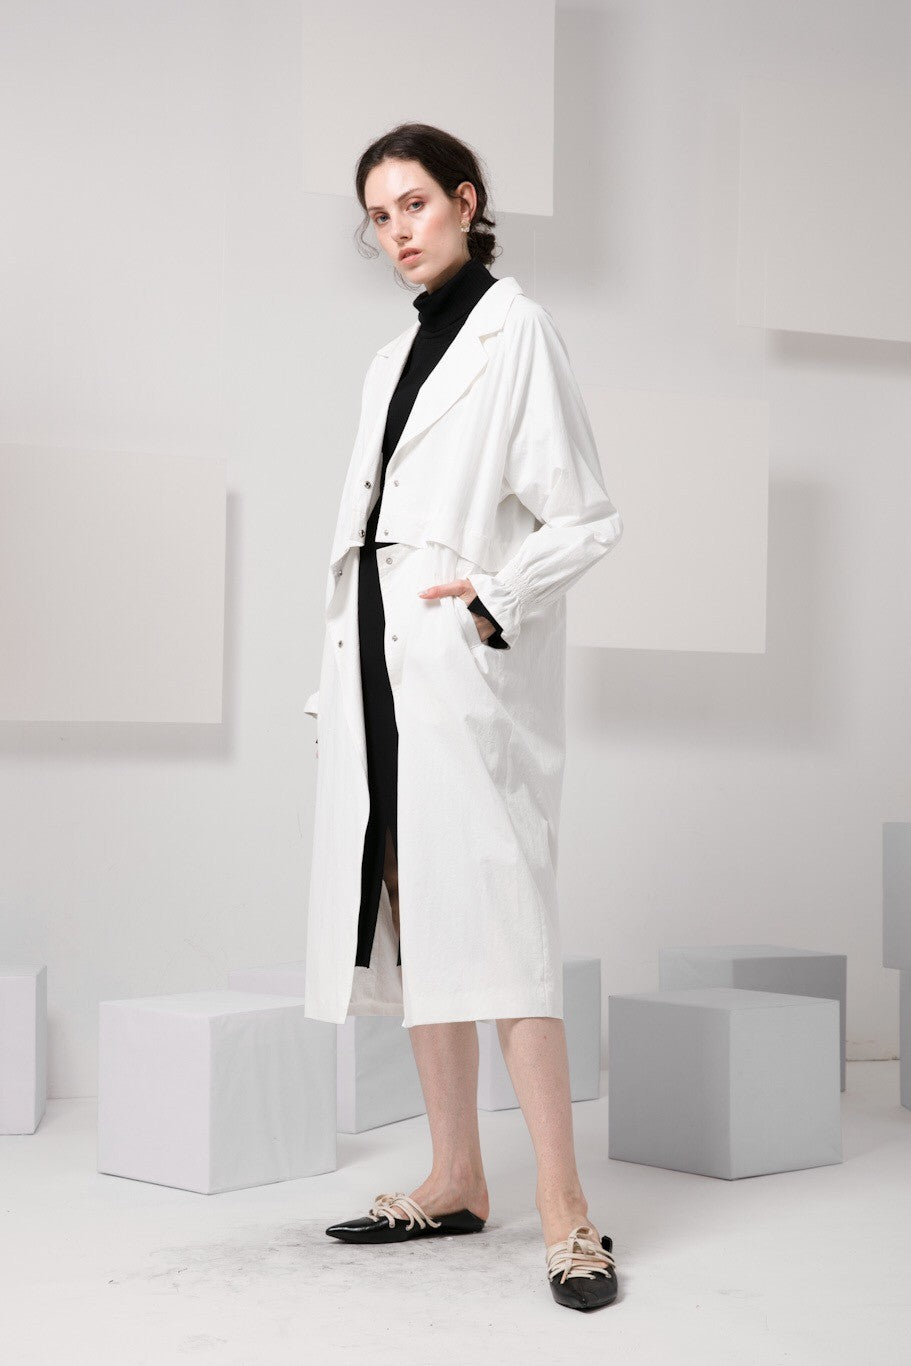 Skye minimalist modern women fashion convertible trench coat frill sleeves luxe fw 2018